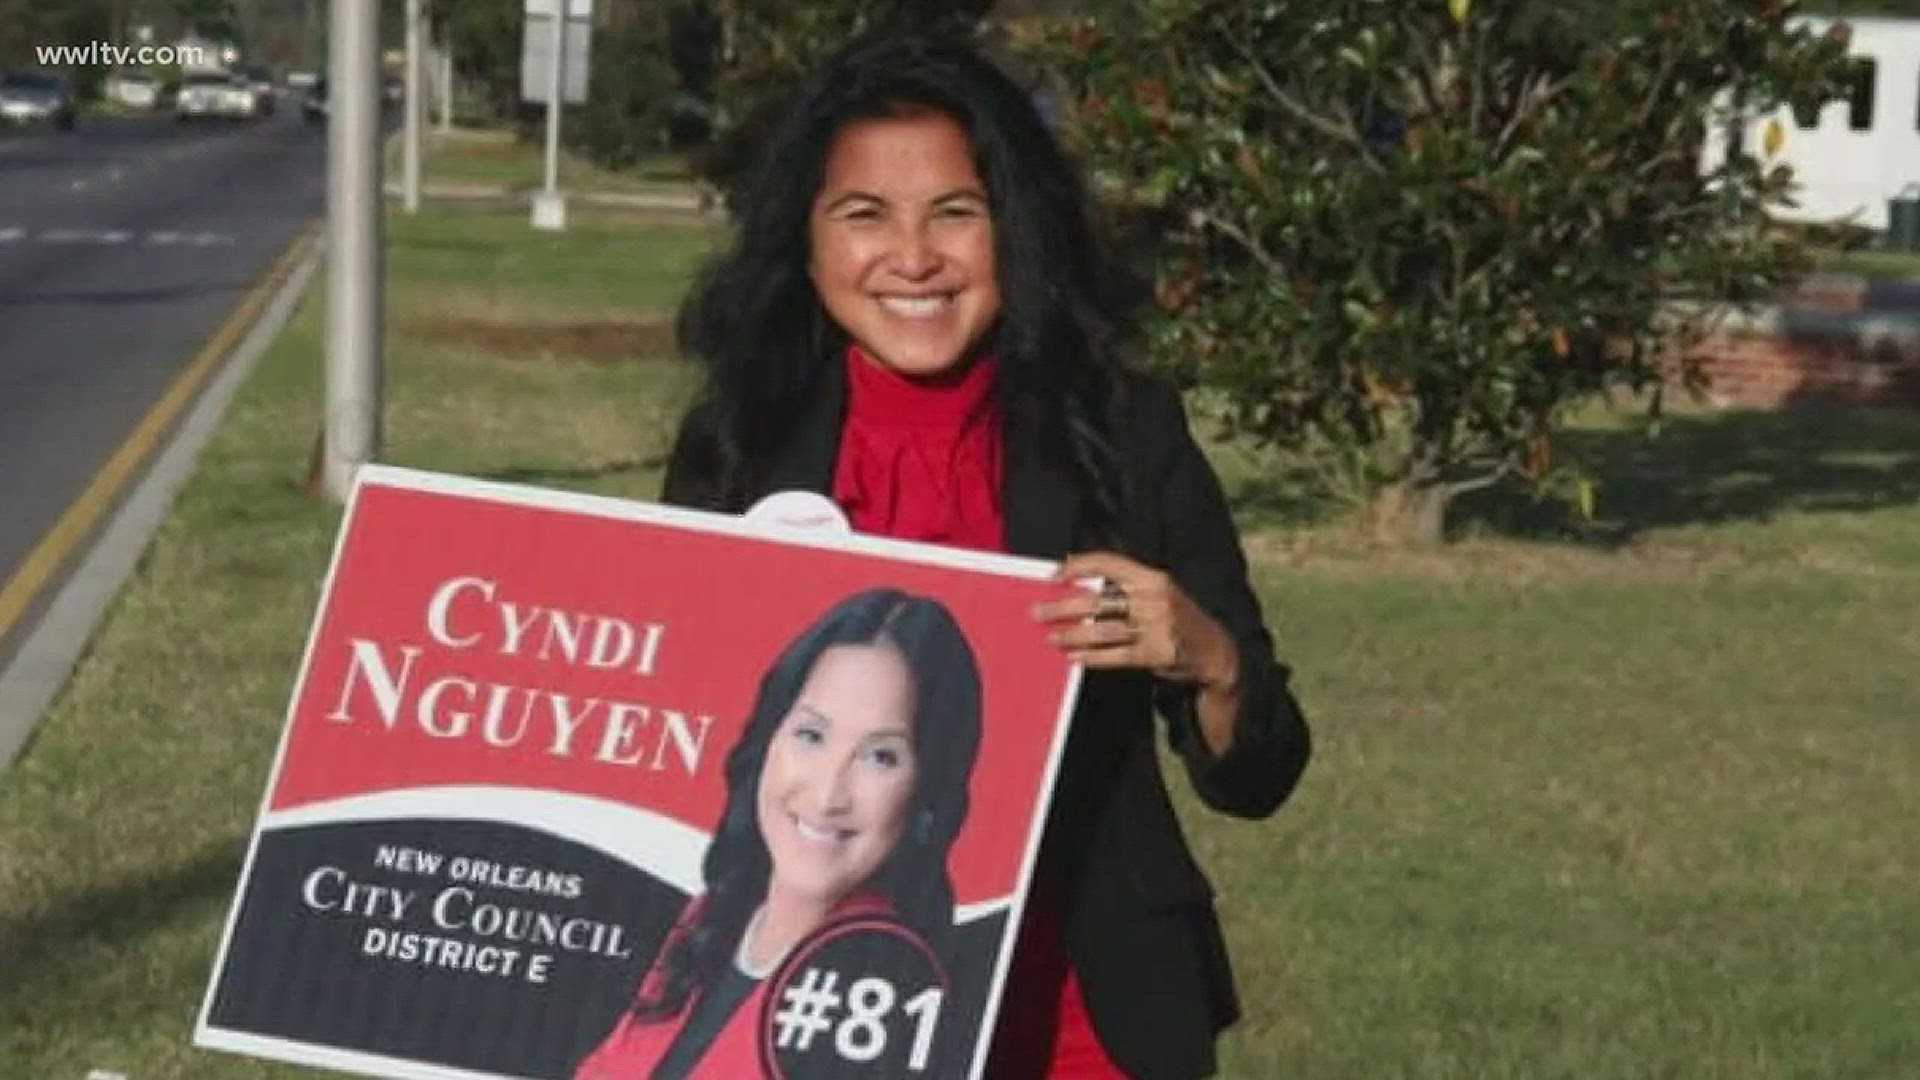 The New Orleans East community celebrates New Year and the election of Cyndi Nguyen.